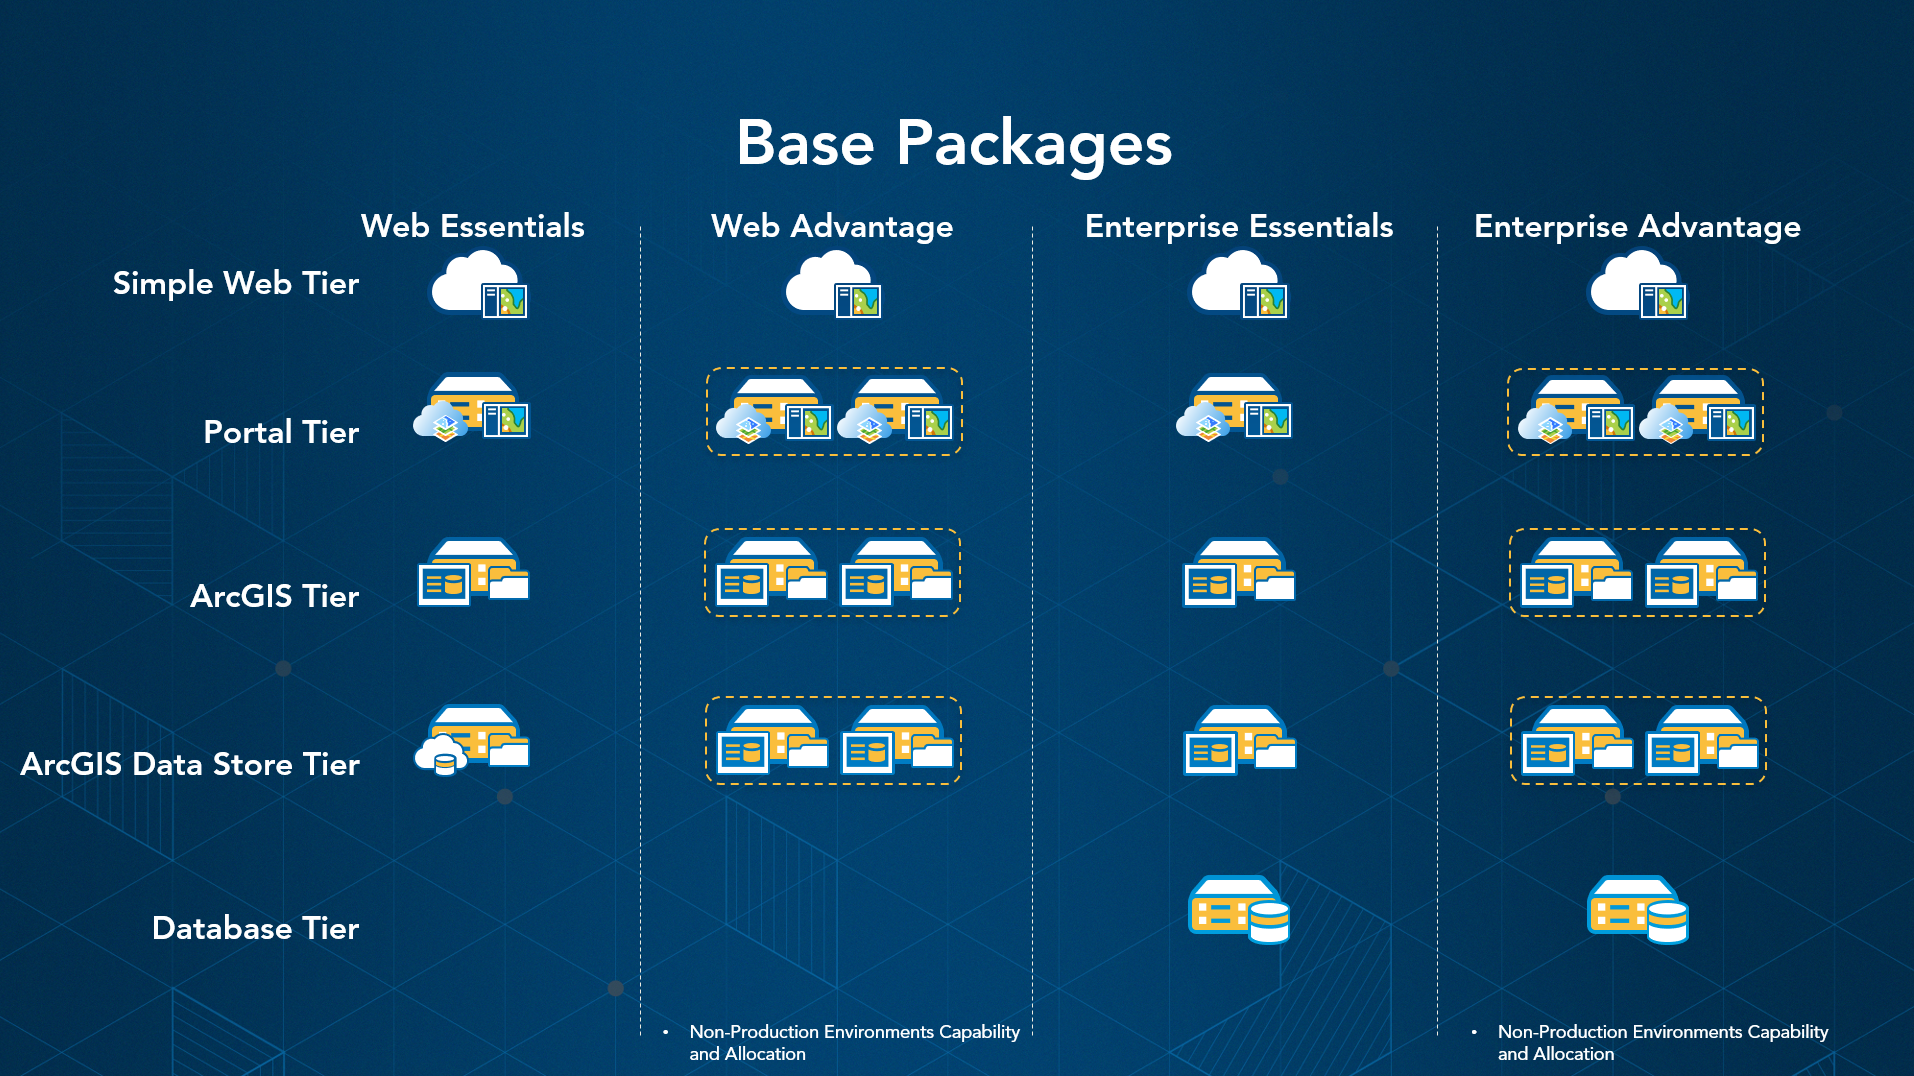 Base packages